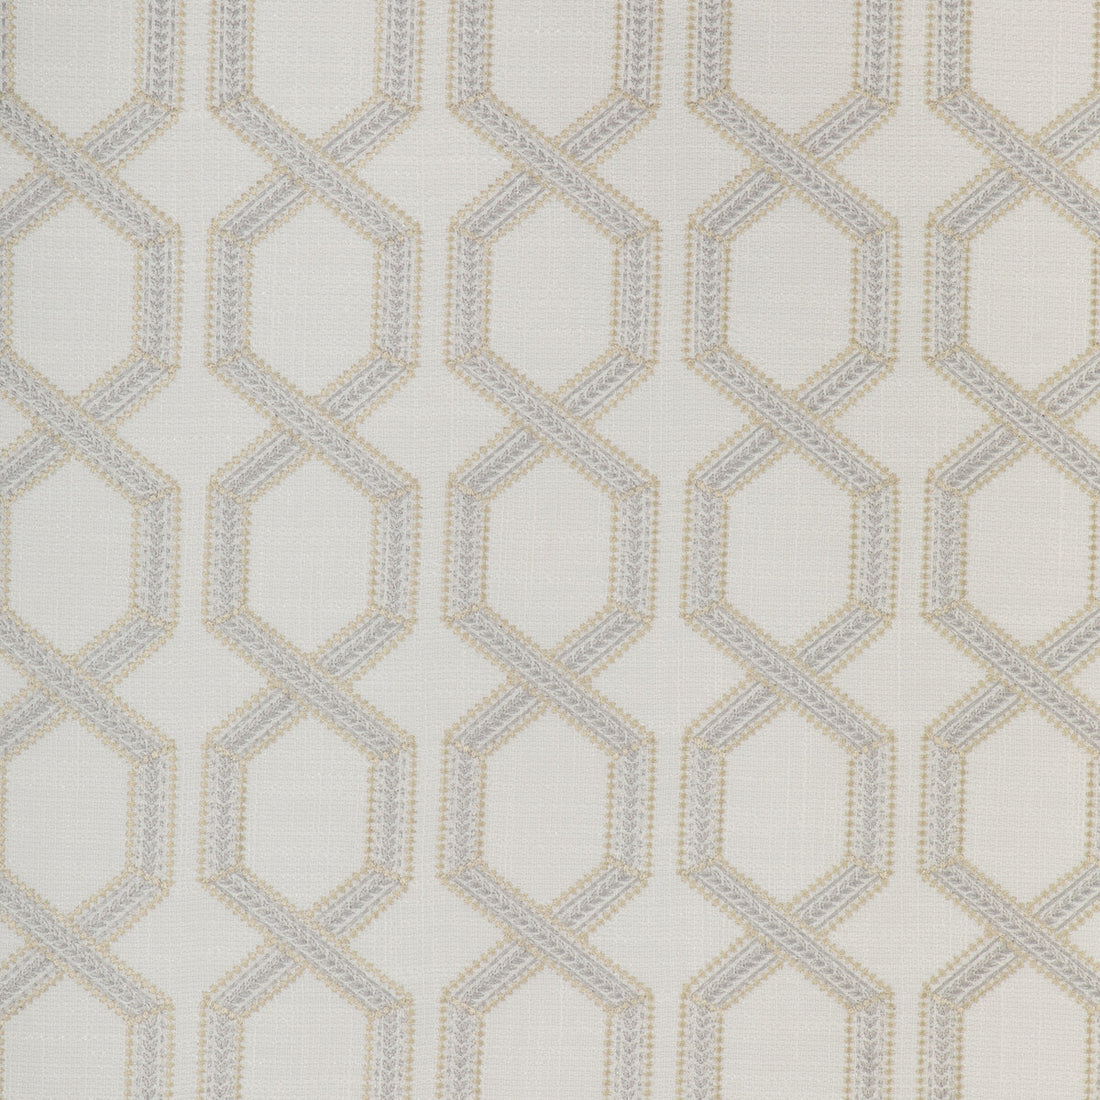 Kravet Basics fabric in 37164-1611 color - pattern 37164.1611.0 - by Kravet Basics in the Modern Embroideries III collection